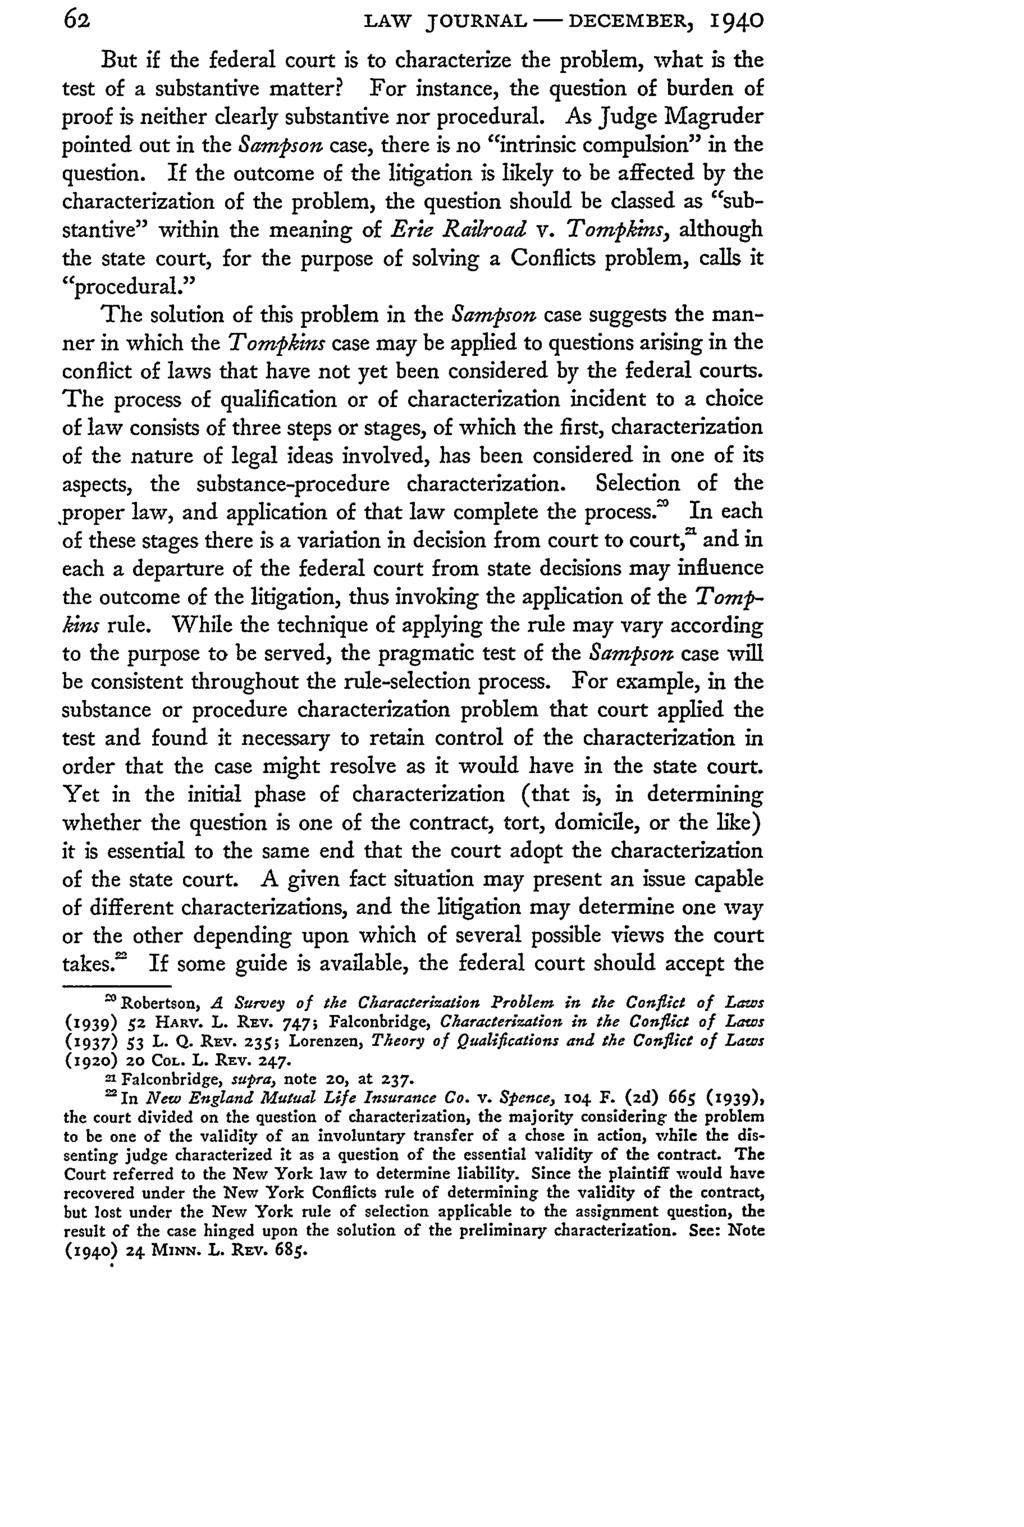 62 LAW JOURNAL - DECEMBER, 1940 But if the federal court is to characterize the problem, what is the test of a substantive matter?